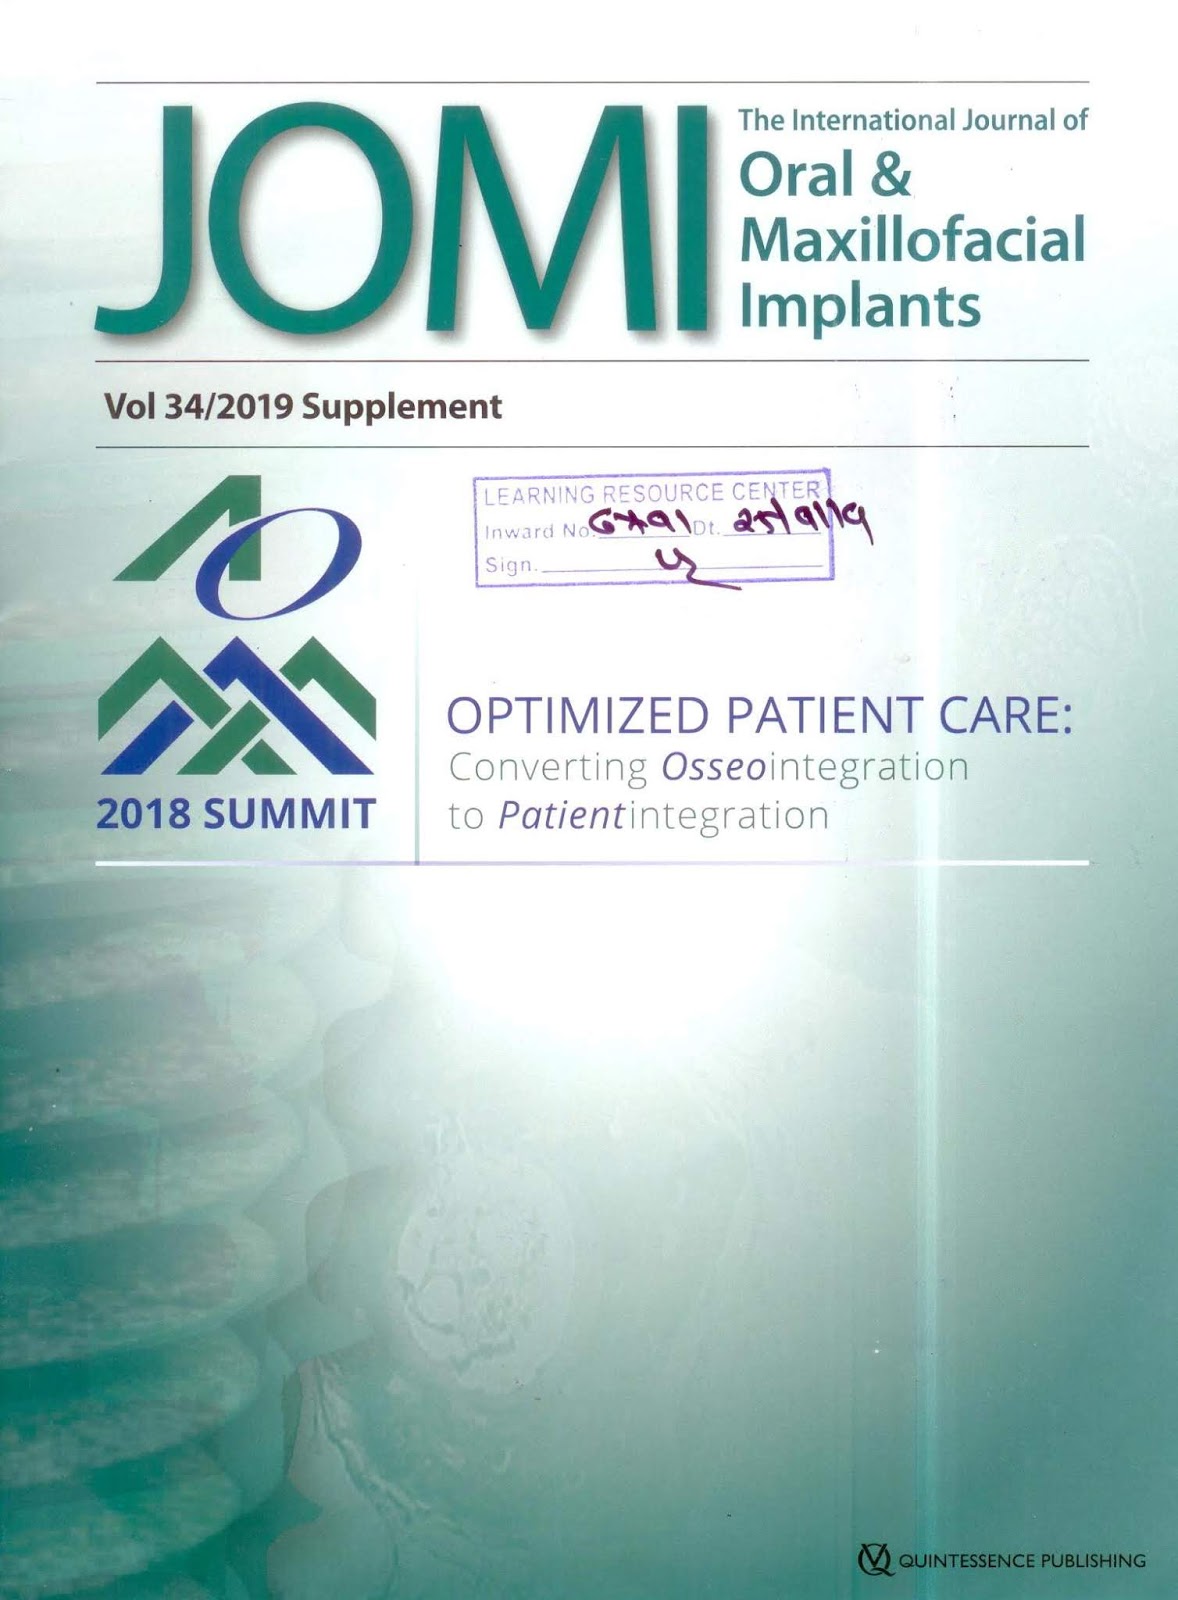 http://www.quintpub.com/journals/omi/journal_contents.php?iss_id=1608&journal_name=OMI&vol_year=2019&vol_num=34#.XYyNkbim_CM